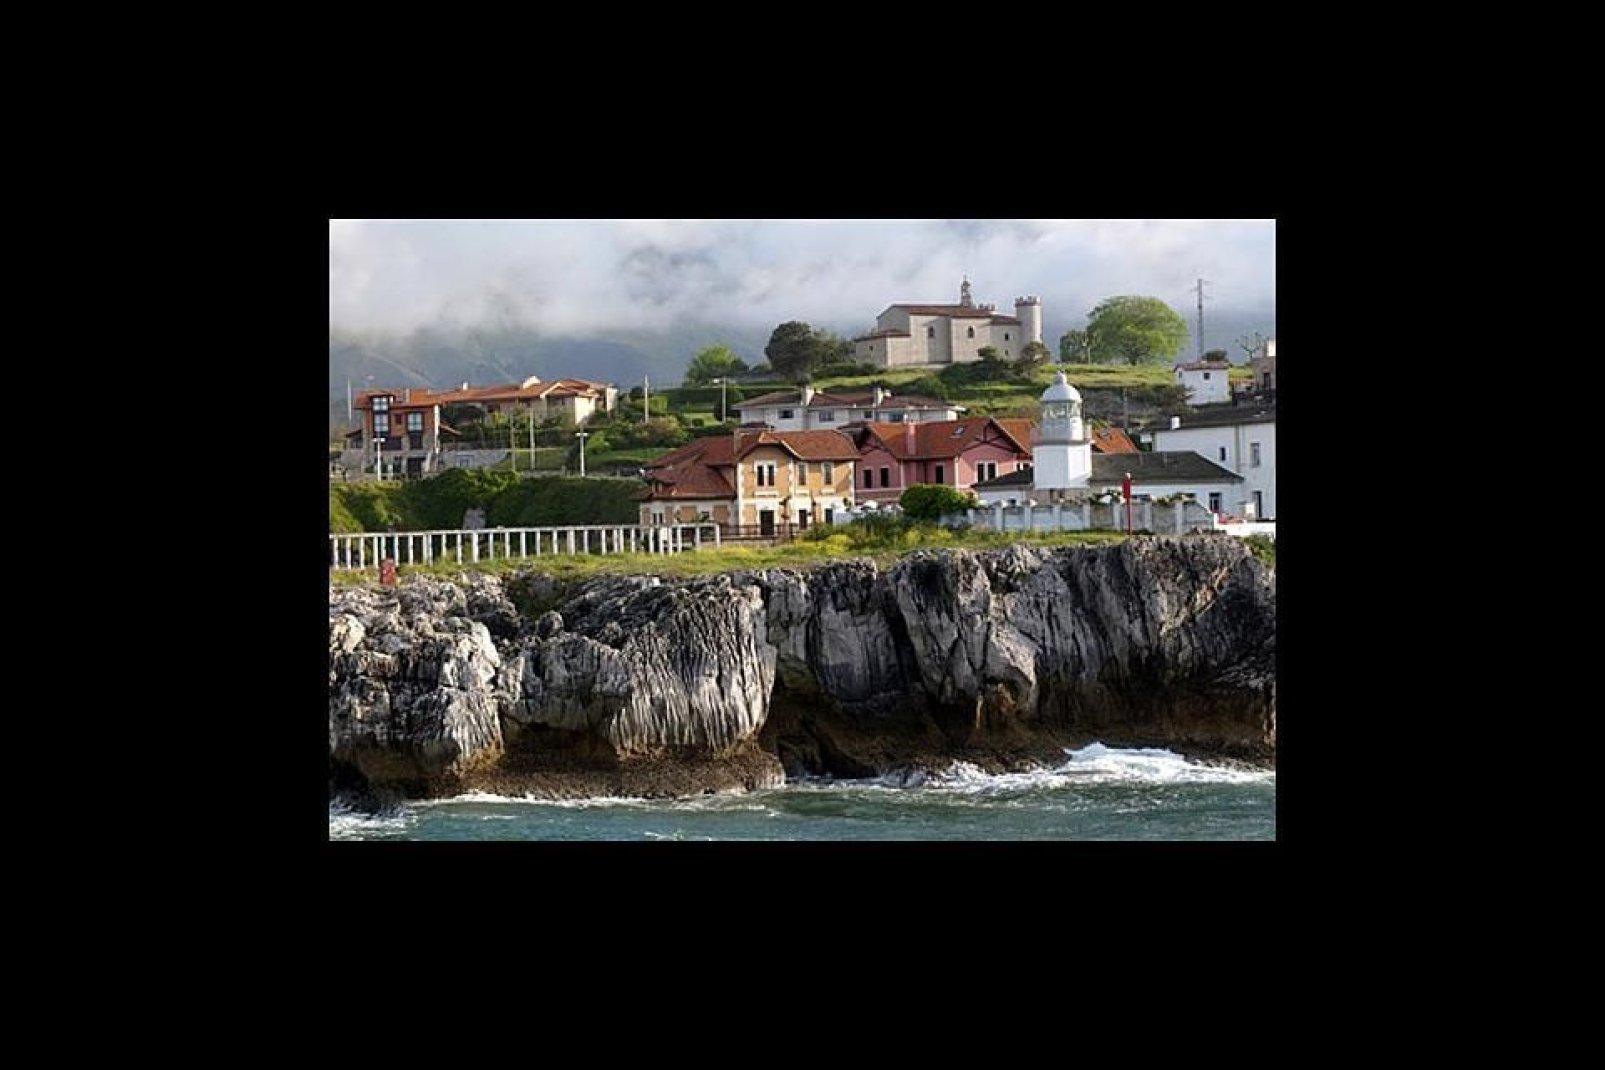 A treasured district bordering Cantabria, Llanes stands out for its paleolithic relics and its significant architectural heritage.